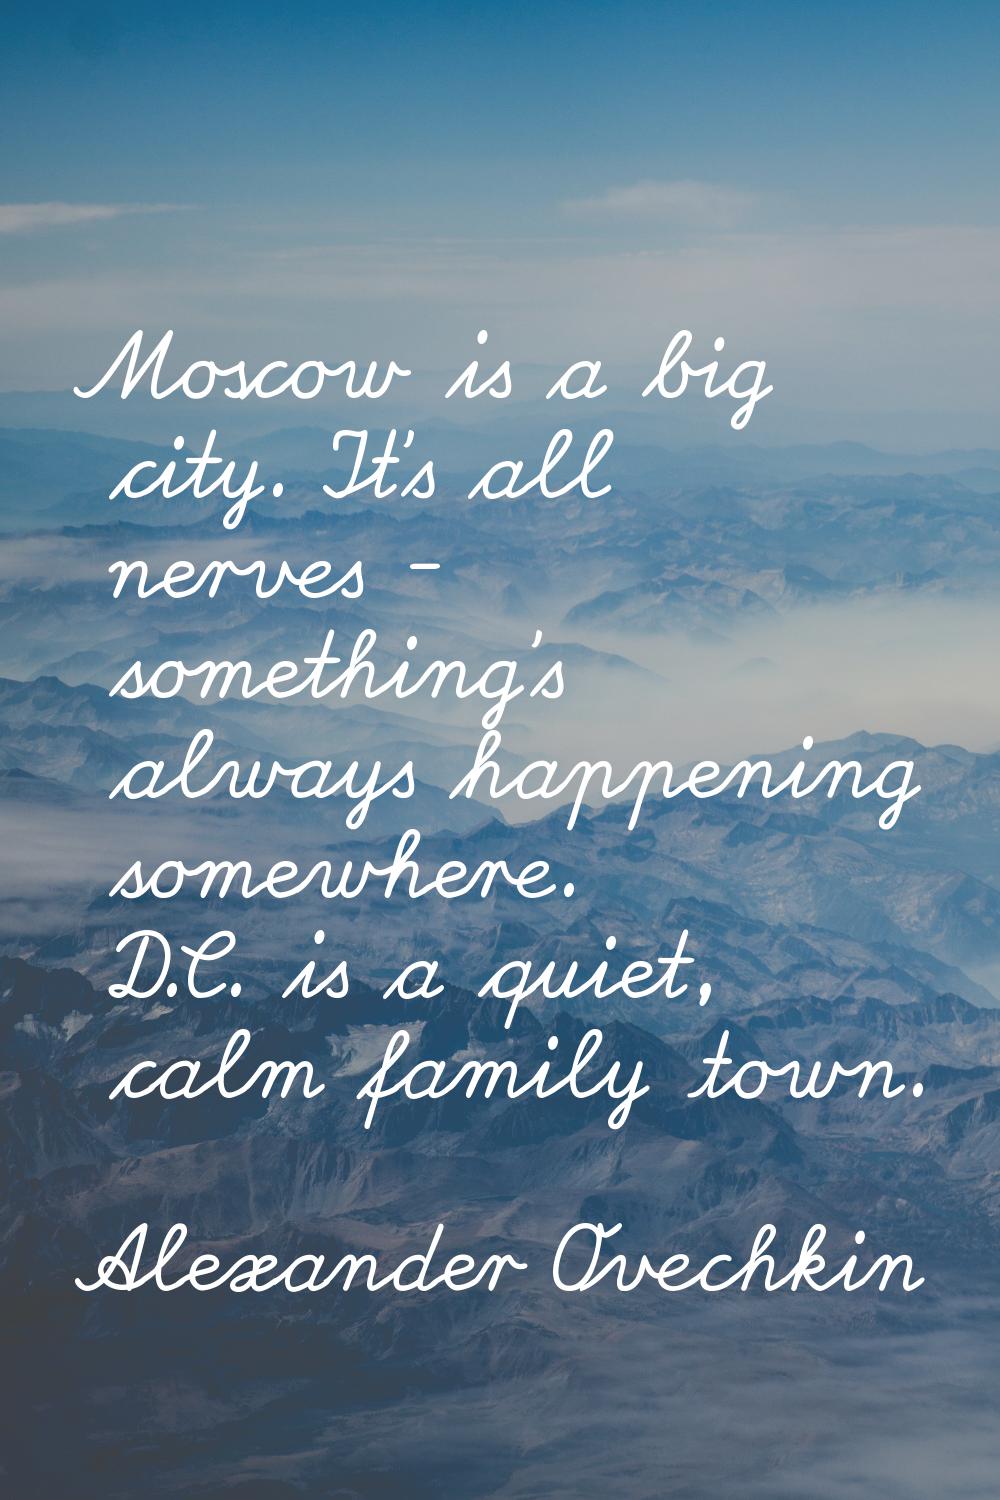 Moscow is a big city. It's all nerves - something's always happening somewhere. D.C. is a quiet, ca